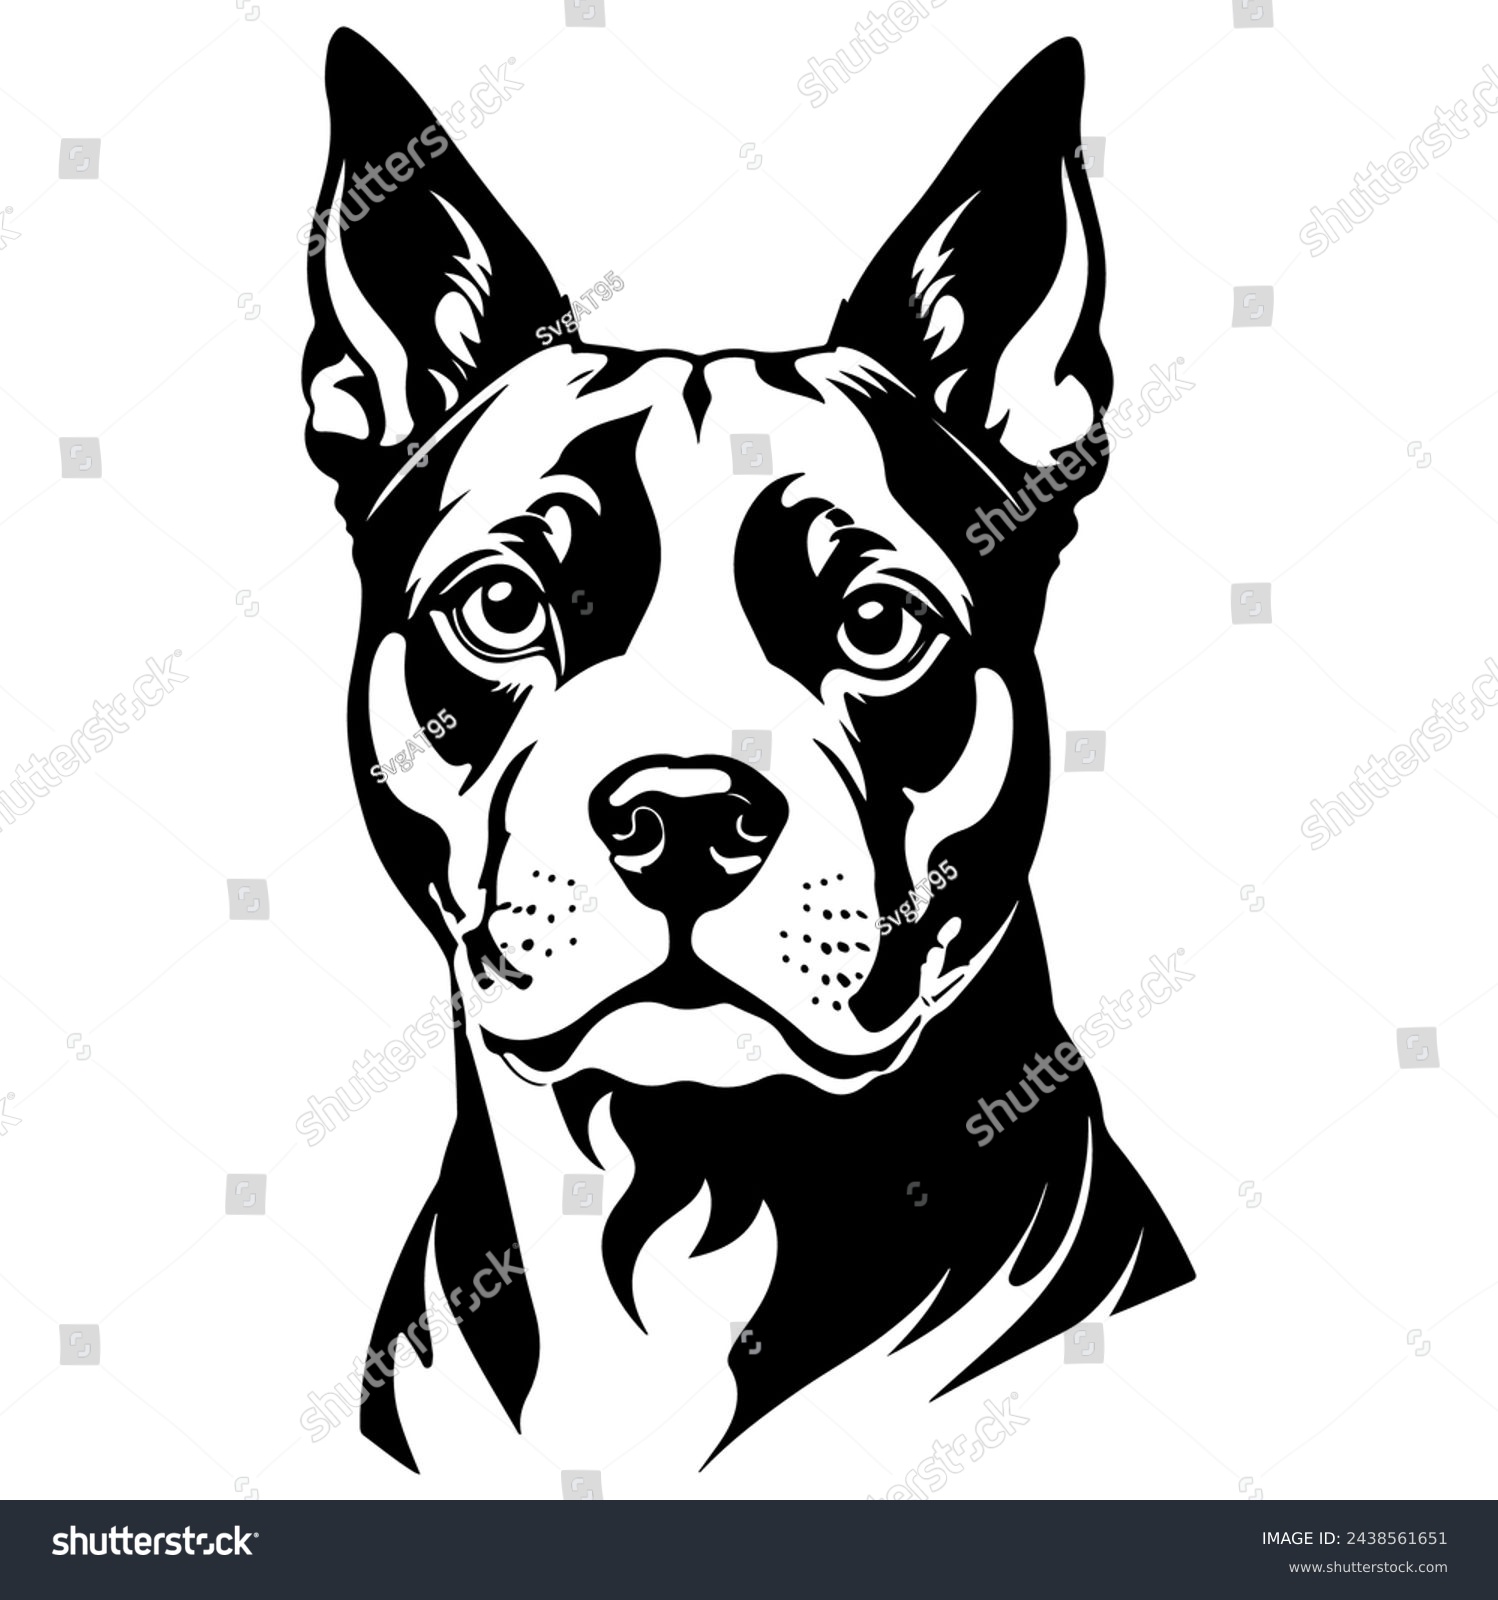 SVG of Portrait of a American Staffordshire Terrier Dog Vector isolated on white background, Dog Silhouettes. svg